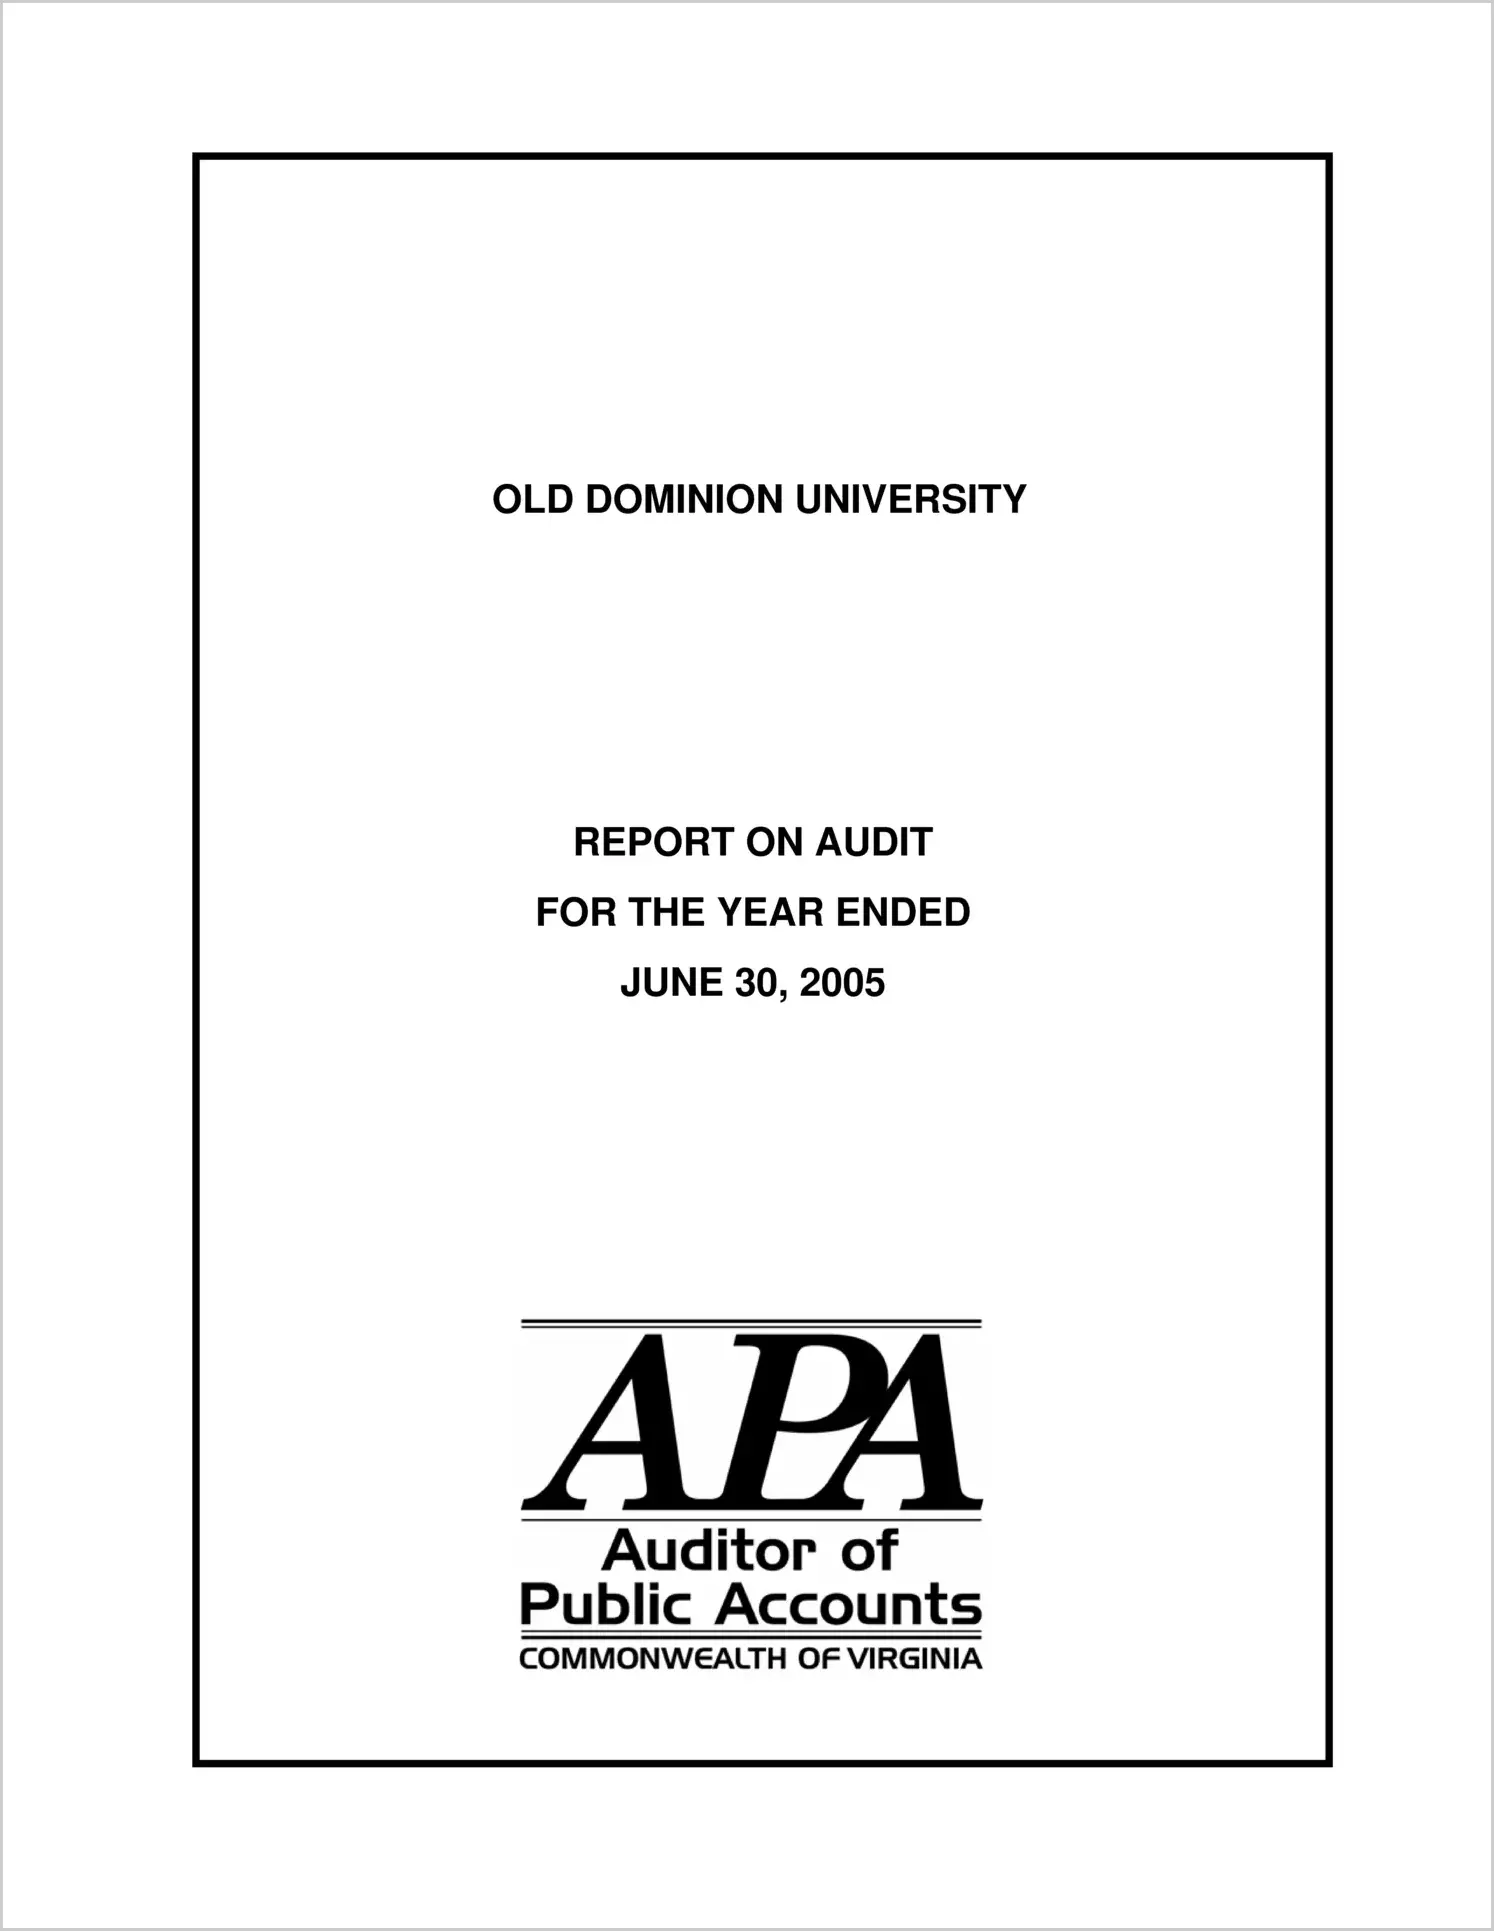 Old Dominion University for the year ended June 30, 2005